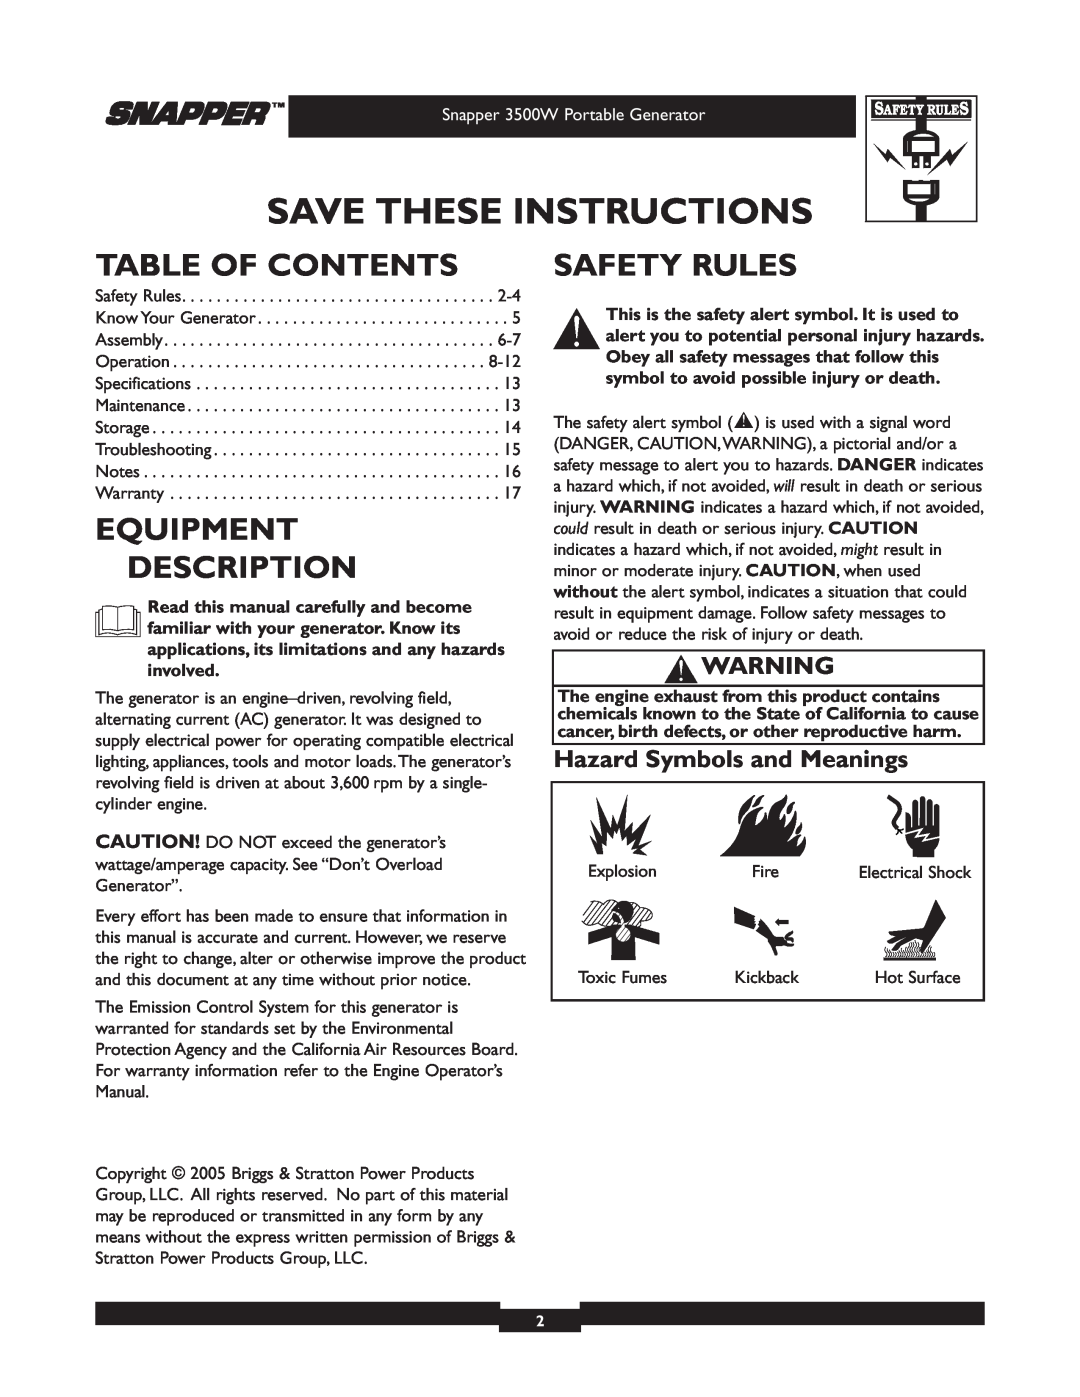 Snapper 3500 Table Of Contents, Equipment Description, Safety Rules, Hazard Symbols and Meanings, Save These Instructions 